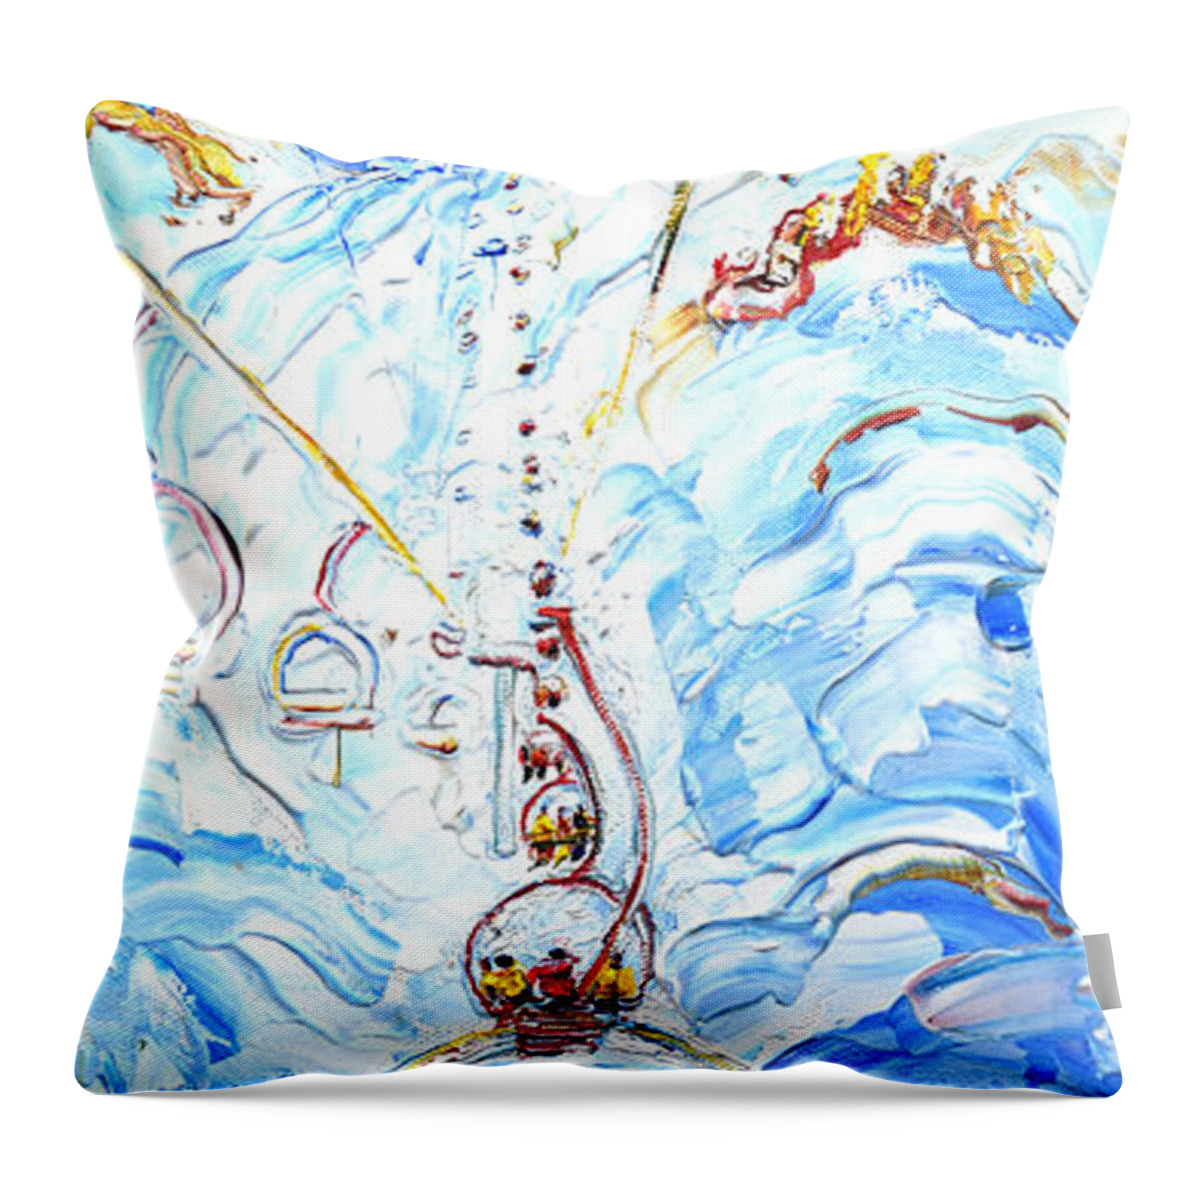 Tignes Throw Pillow featuring the painting 3 On A Chair by Pete Caswell